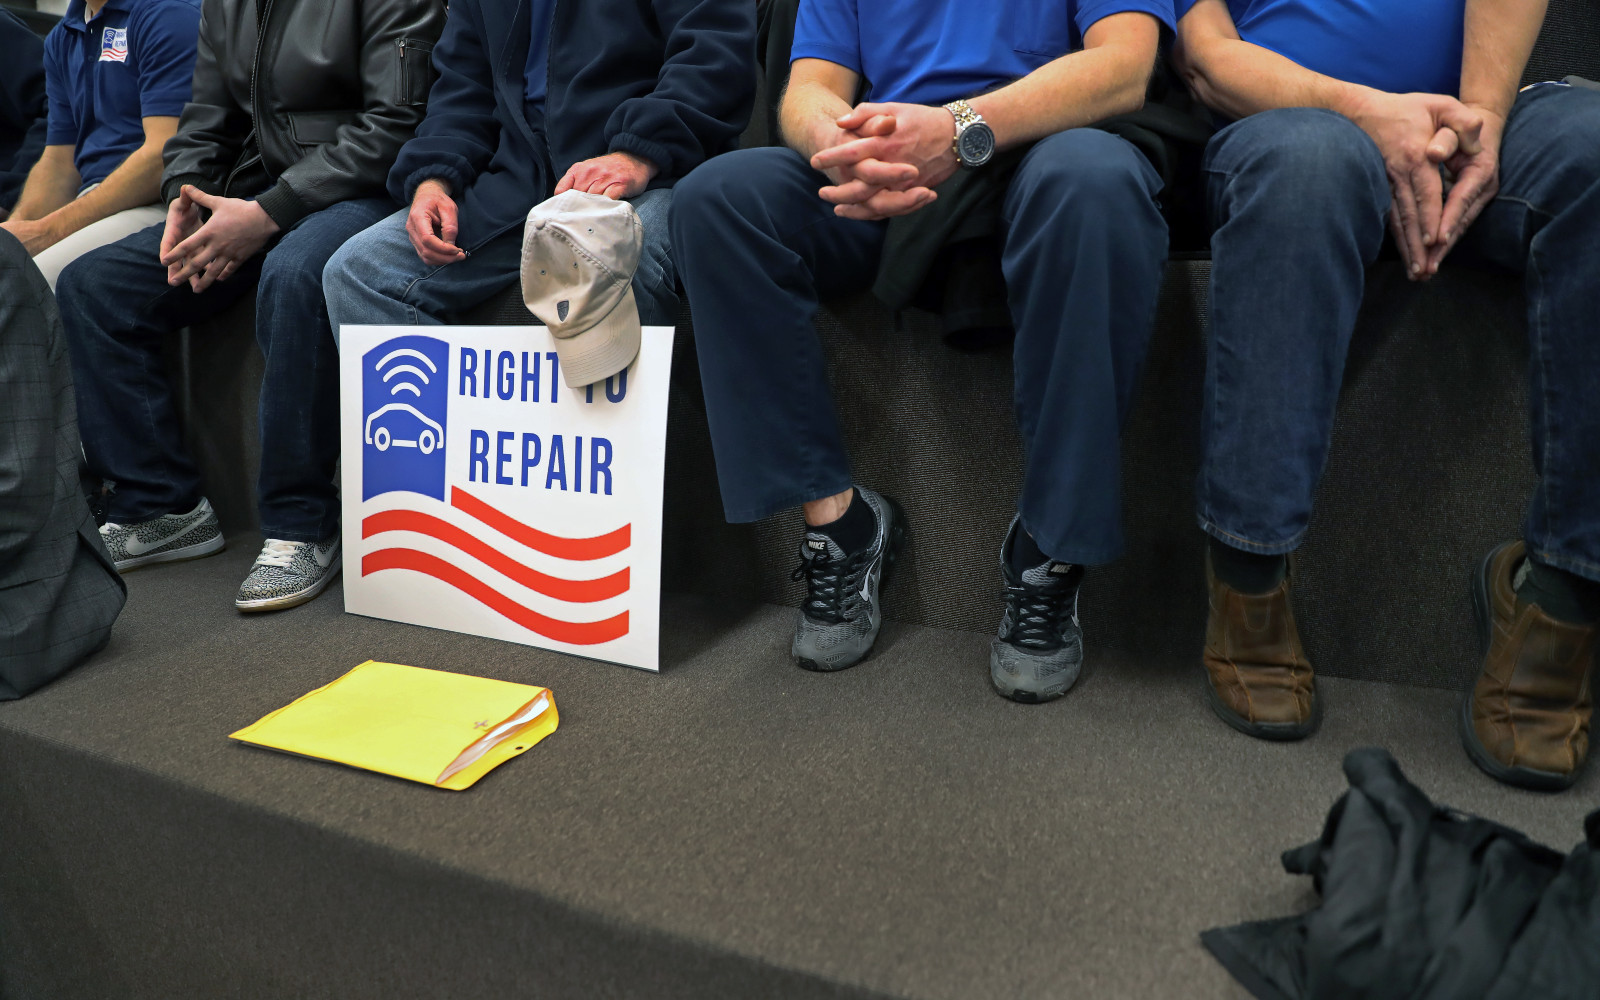 Torsos and legs of five men seated on a bench side by side, with a poster that says "Right to Repair" in front of one of them